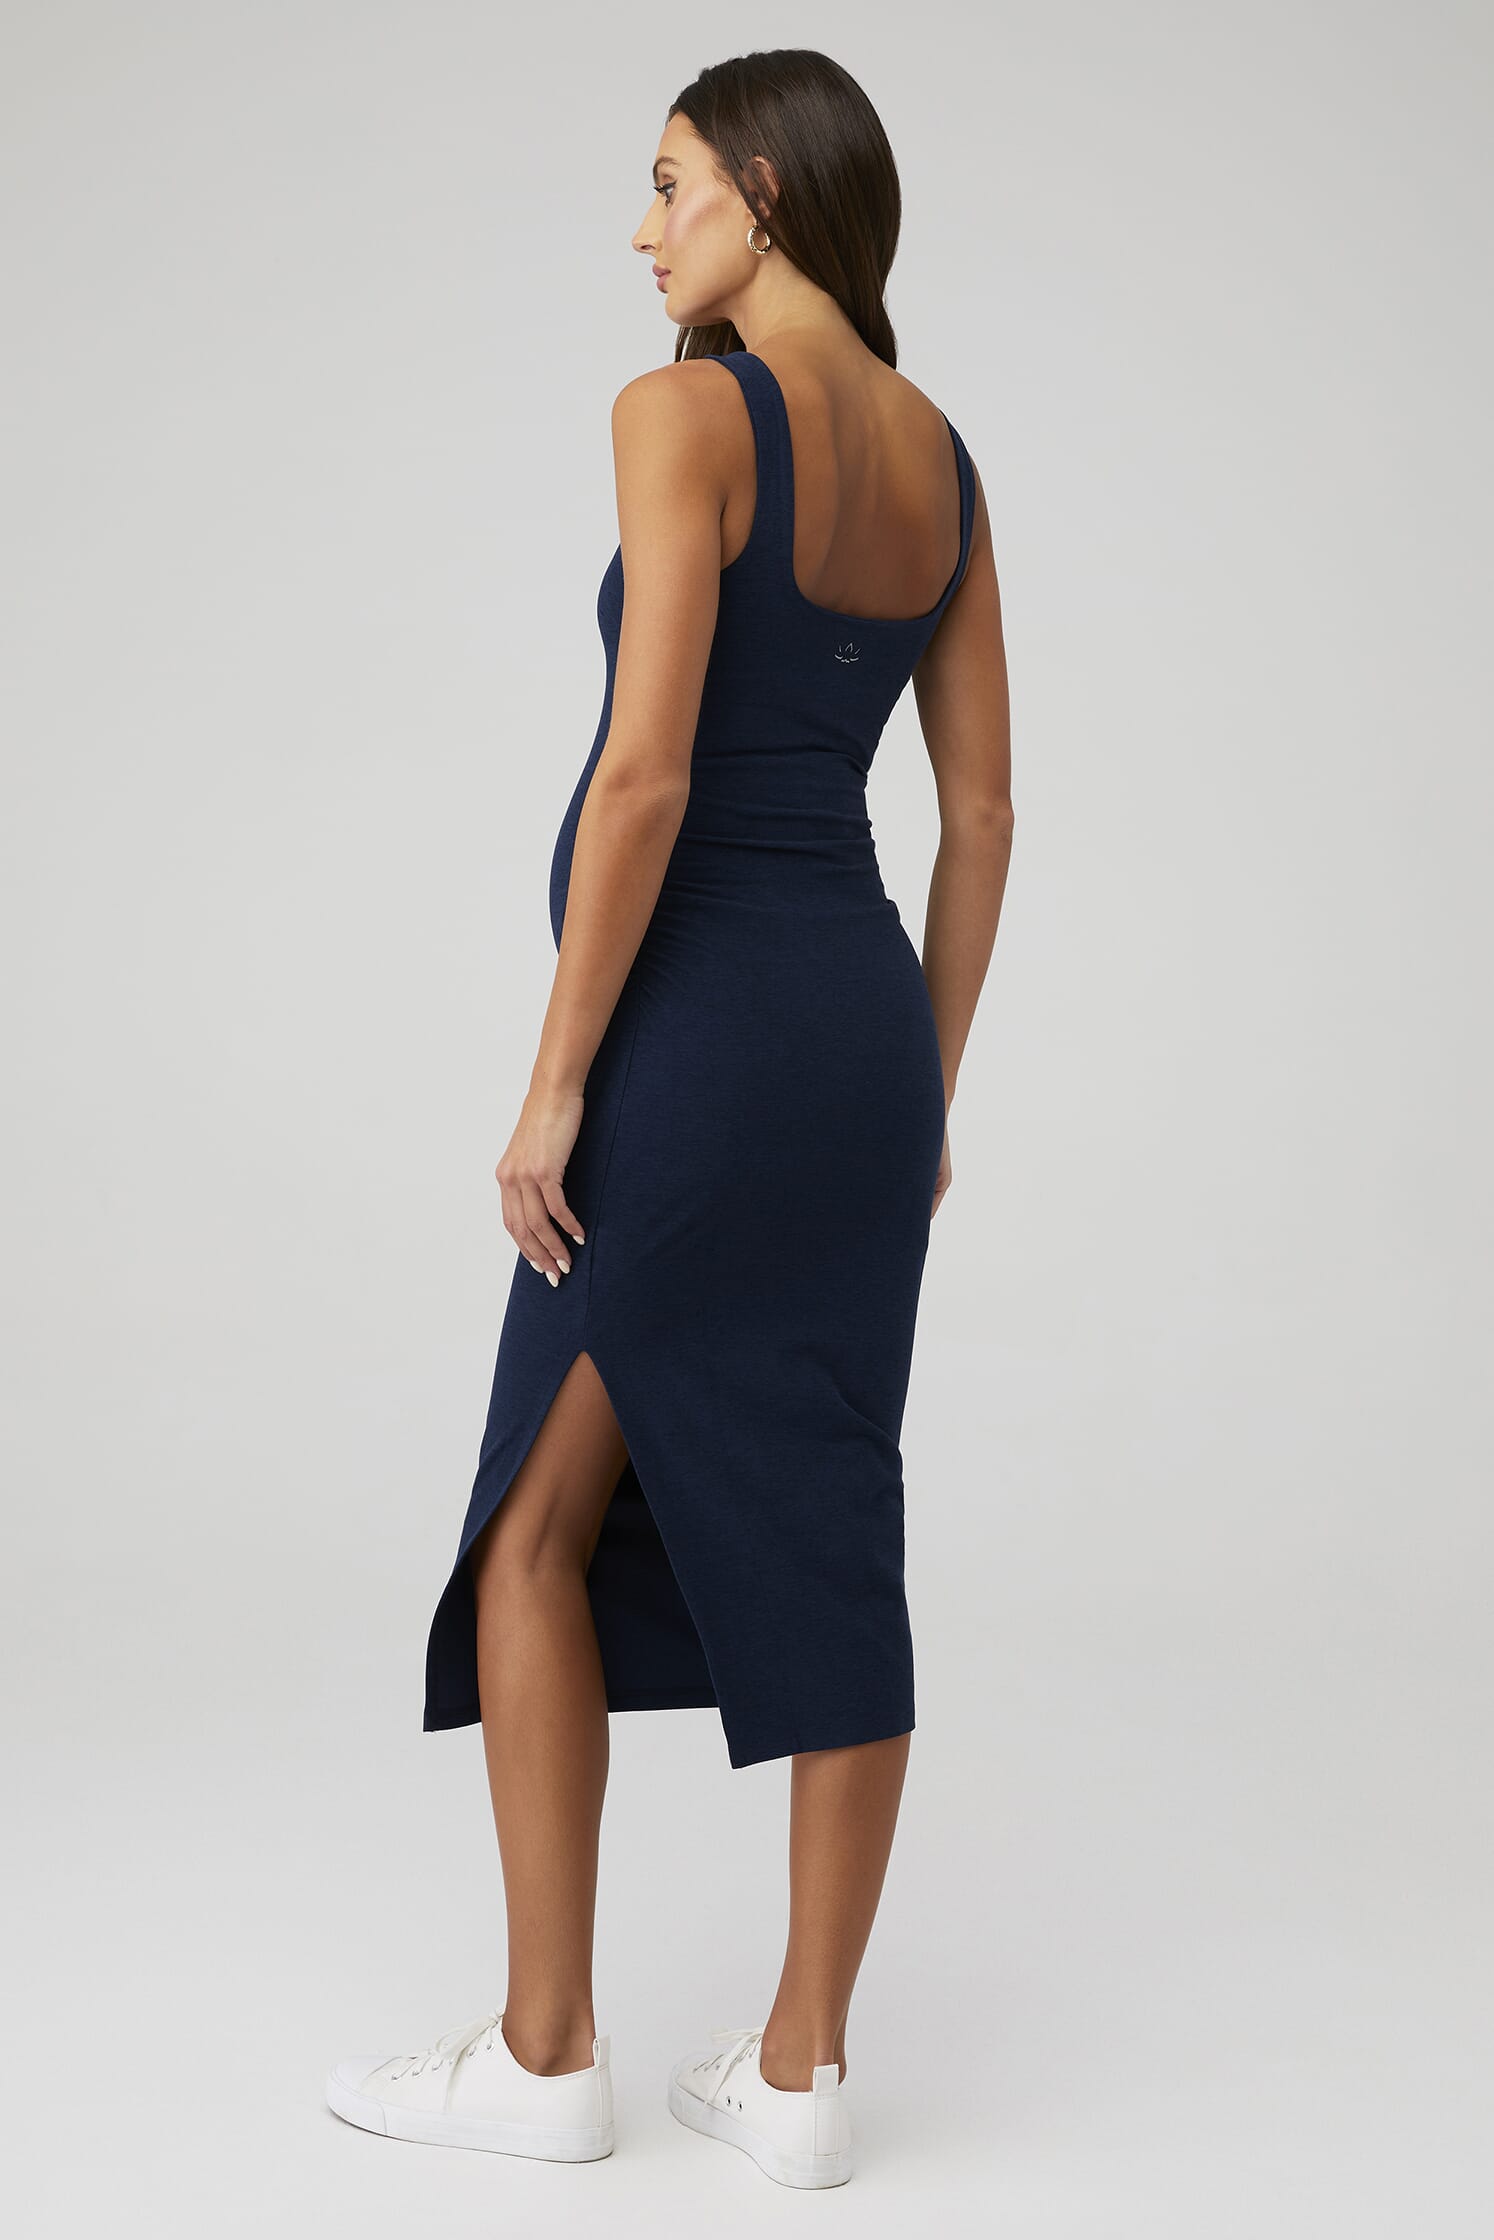 Beyond Yoga  Spacedye Icon Maternity Dress in Nocturnal Navy